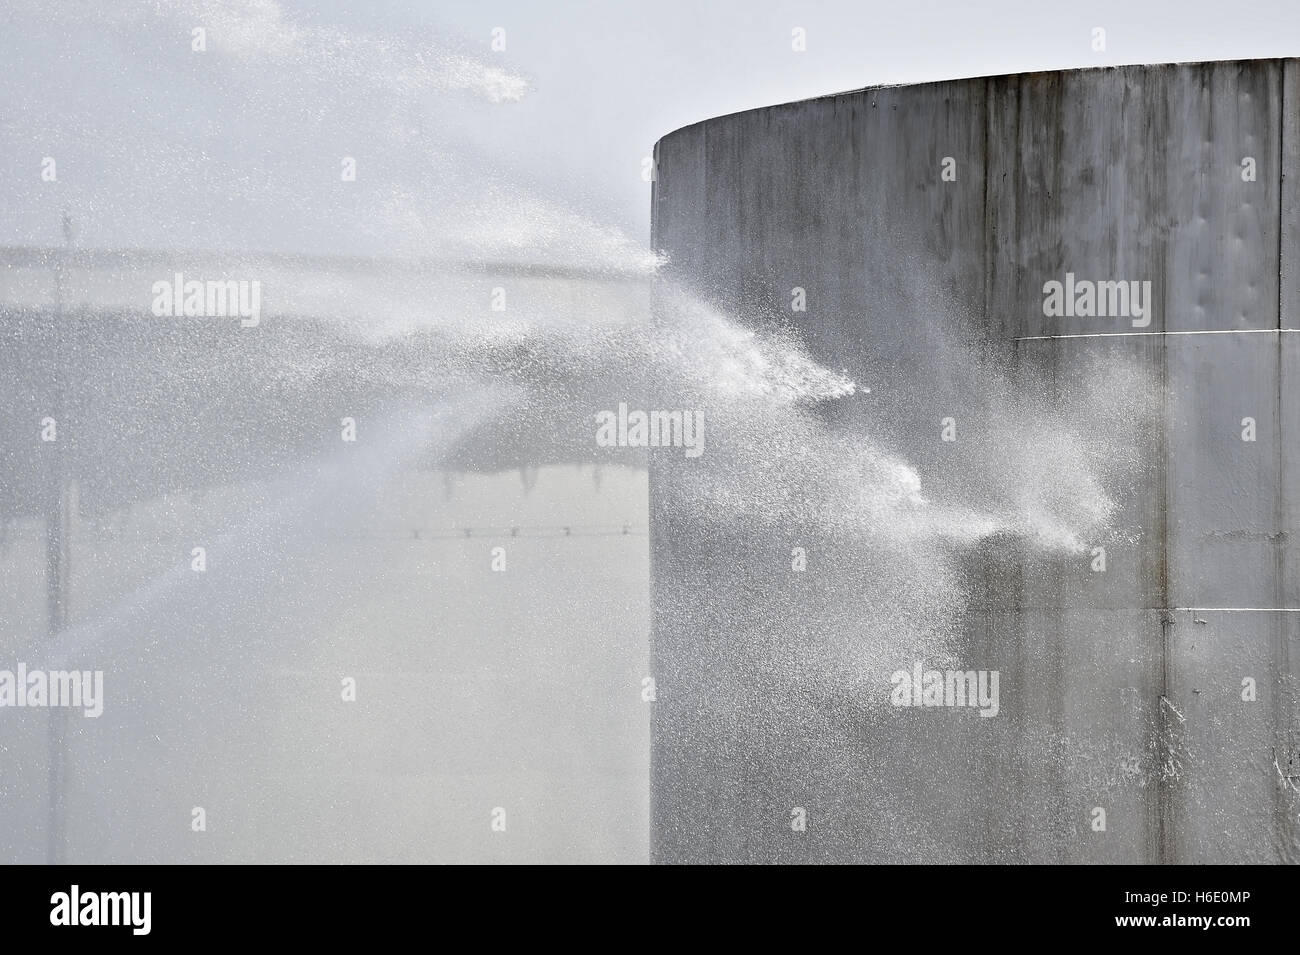 Firefighter water jet extinguish the fire started near a petrol storage tank Stock Photo